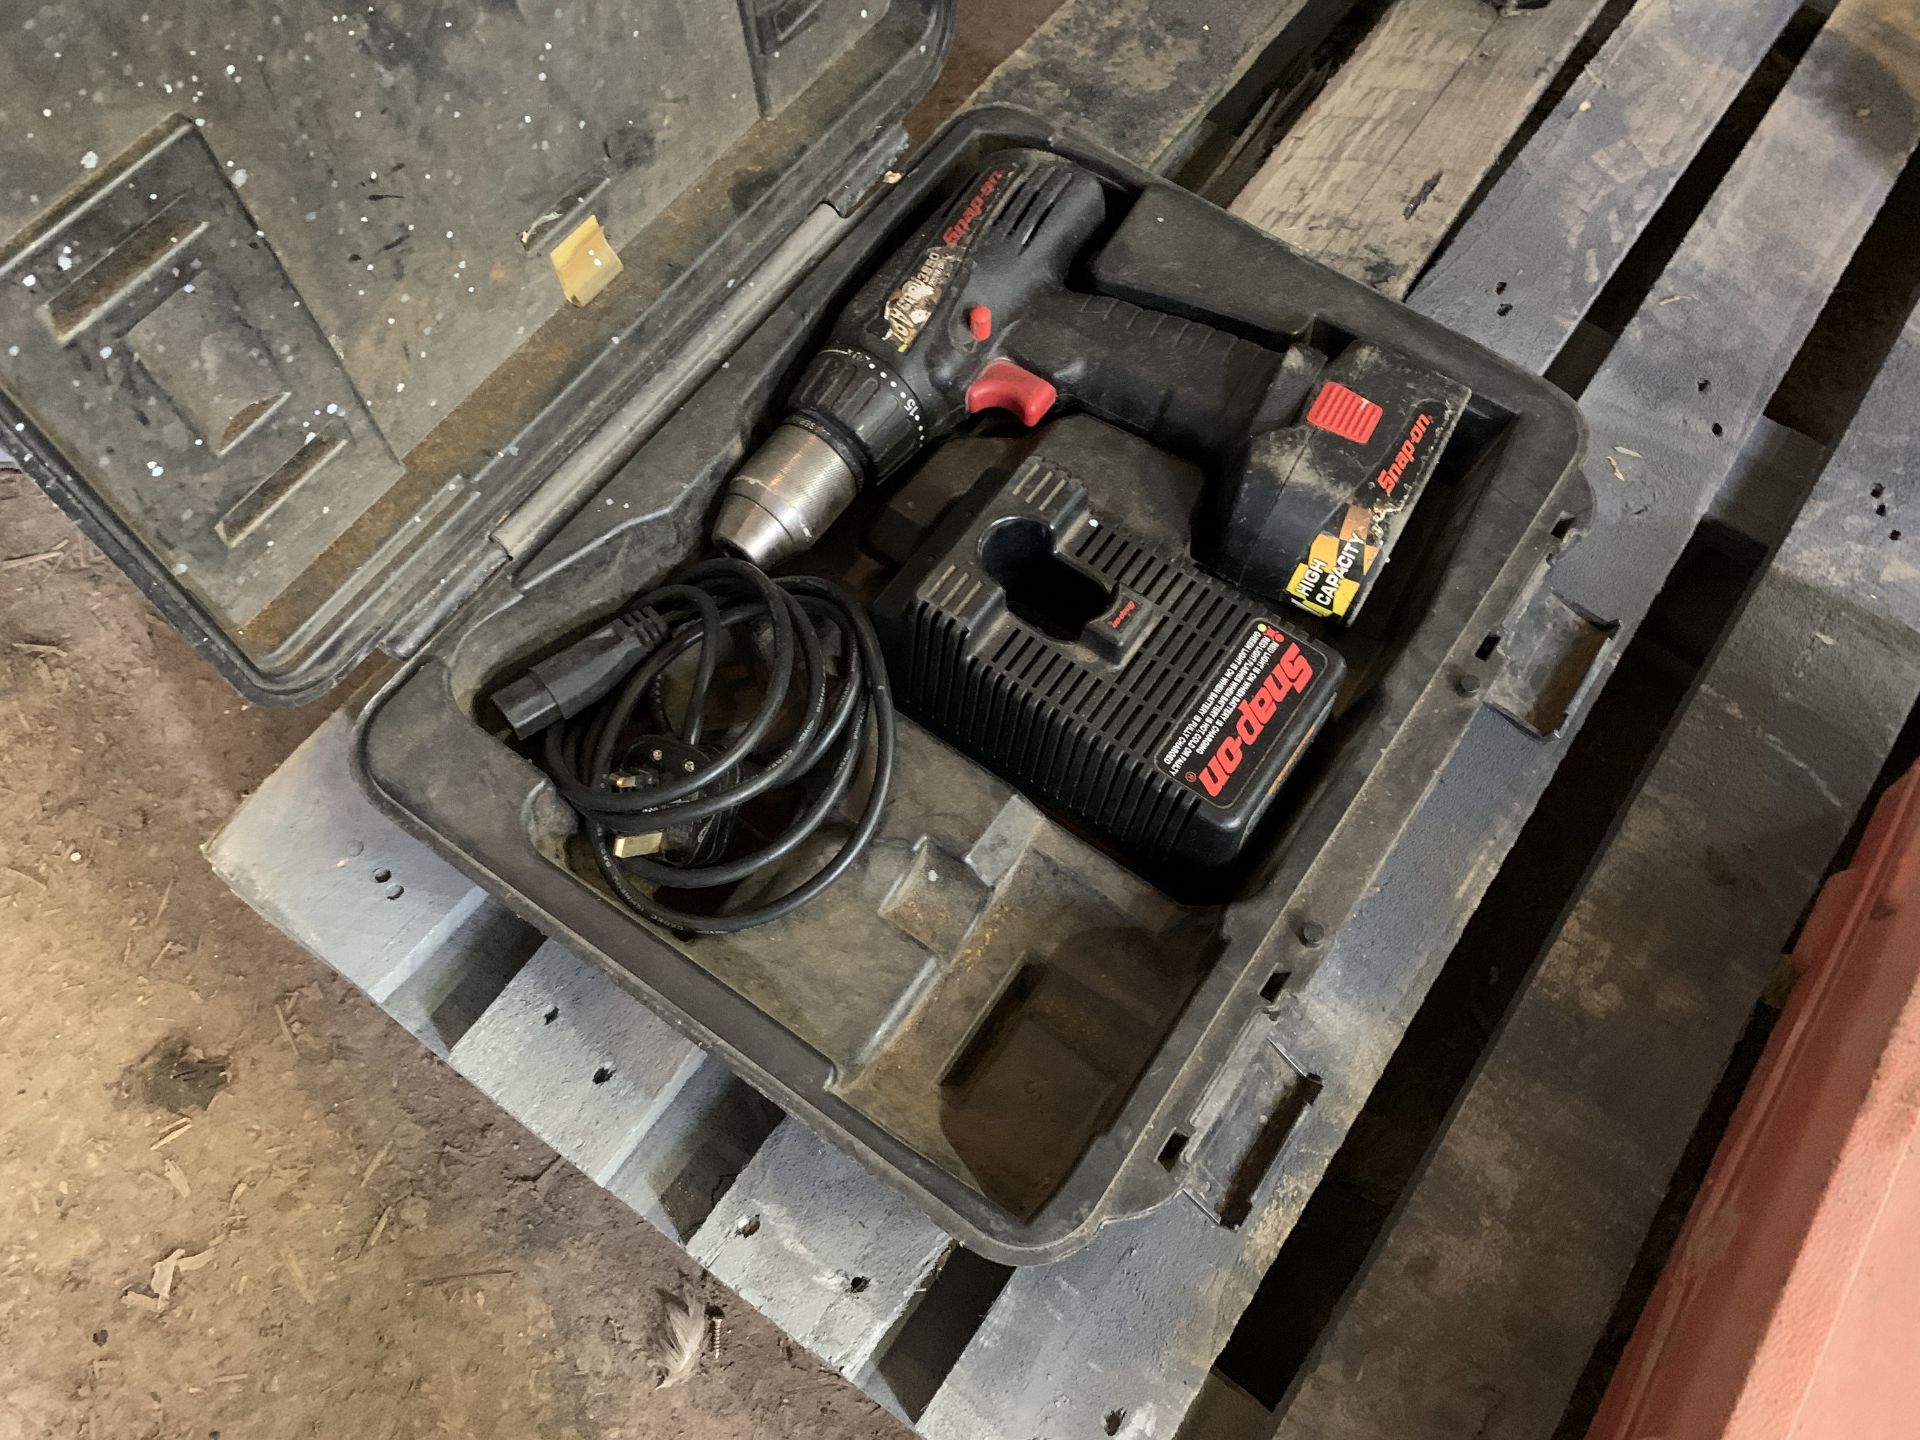 Snap-on battery drill